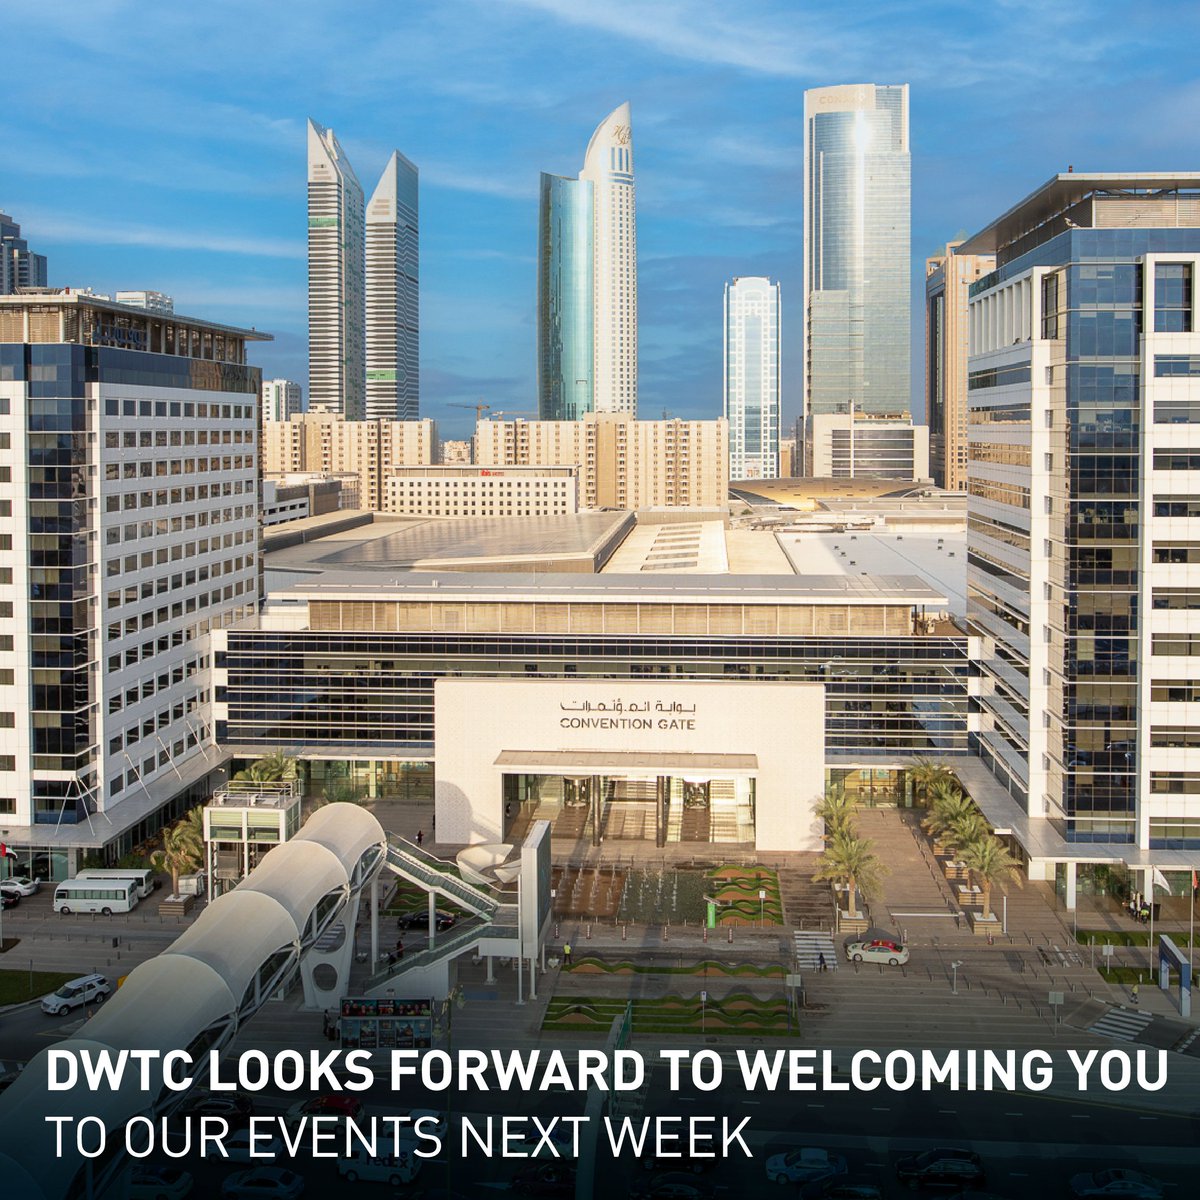 This week saw unexpected weather in Dubai, but despite challenges, DWTC is now fully operational thanks to our dedicated team. We look forward to hosting events next week, starting with Petworld Arabia on Monday at 10 am. Explore our calendar at dwtc.com/en/events/